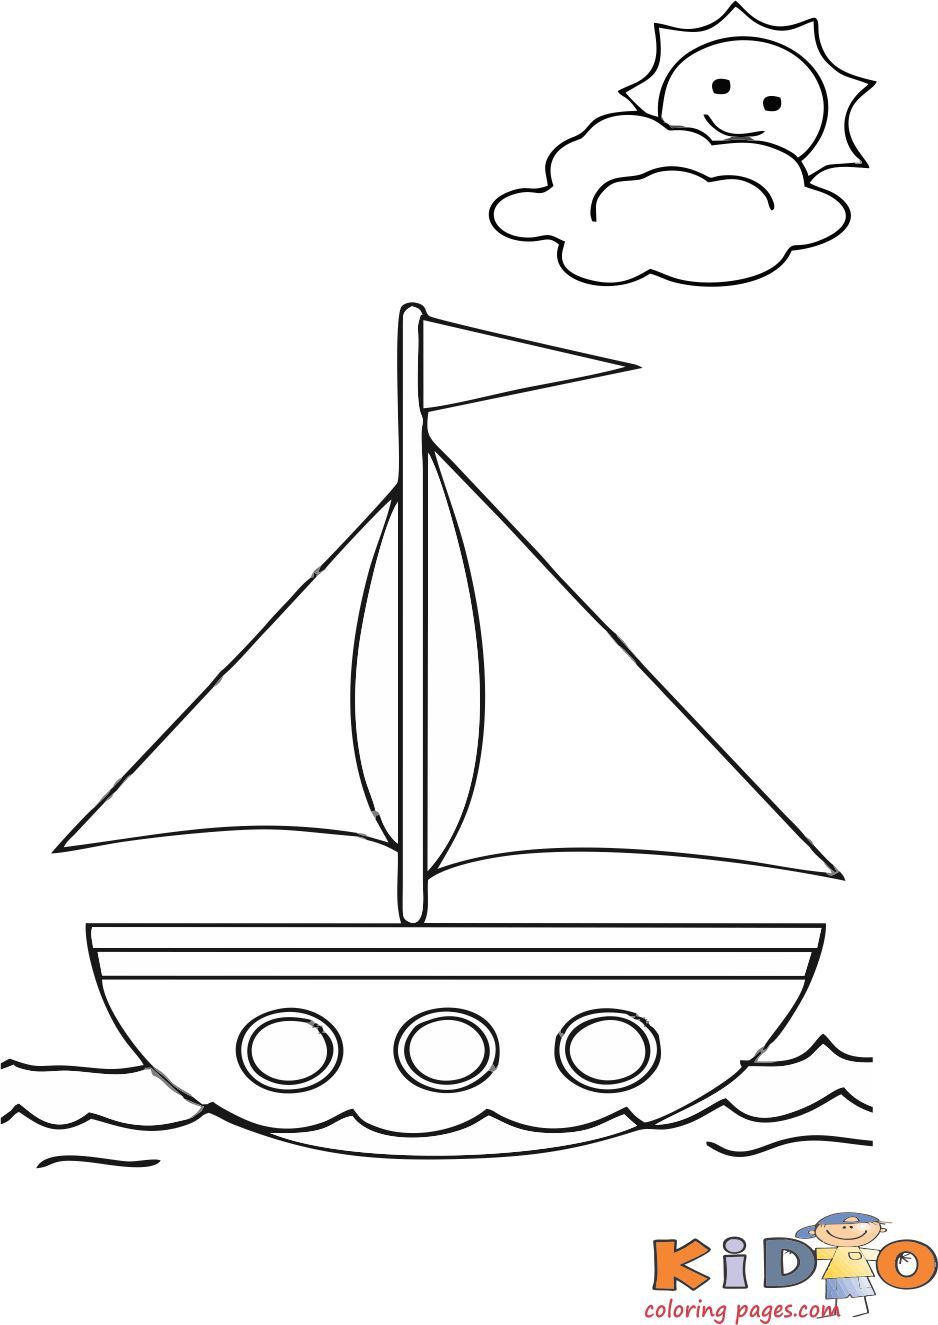 Summer boat coloring pages for kids coloring pages for kids summer coloring sheets summer coloring pages